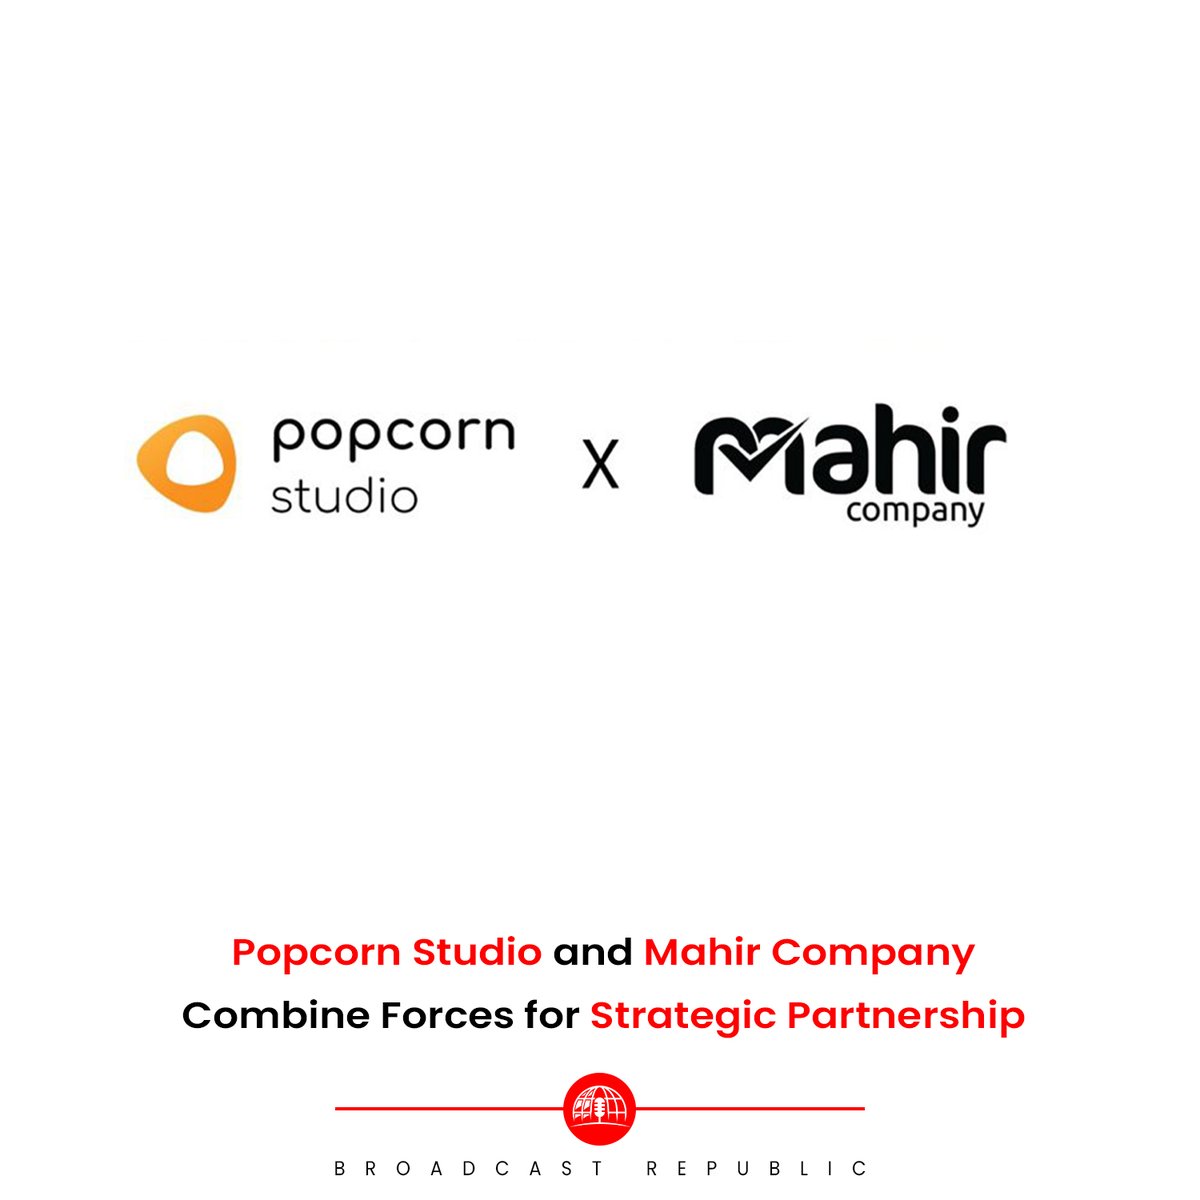 PopCorn Studio has partnered with Mahir Company to enable its’ member base to avail their services and enjoy exclusive member discounts!

#PopcornStudio #MahirCompany #BroadcastRepublic #Parntership #Coworking 
🌐 Read More: Broadcastrepublic.com